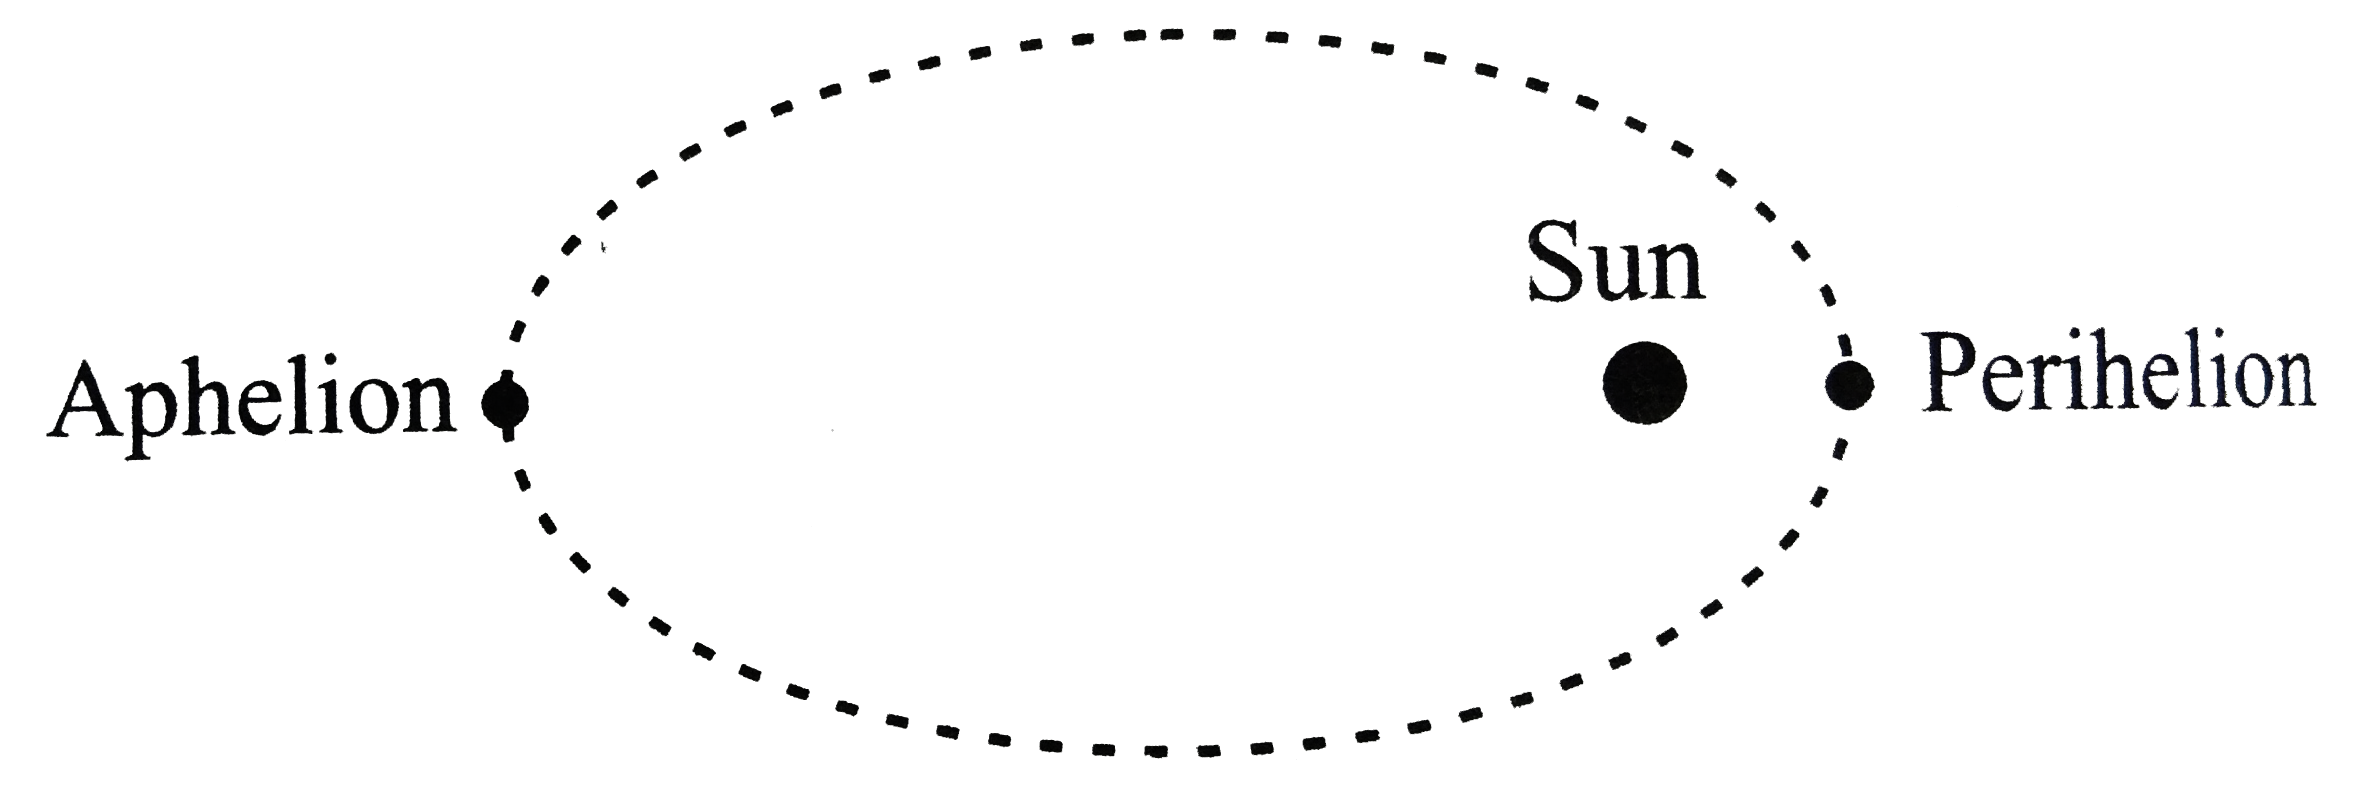 The orbit of Pluto is much more eccentric than the orbits of the other planets. That is, instead of being nearly circular, the orbit is noticeably elliptical. The point in the orbit nearest to the Sun is called the perihelion and the point farthest from the Sun is called the aphelion.      At perihelion, the gravitational potential energy of Pluto in its orbit has